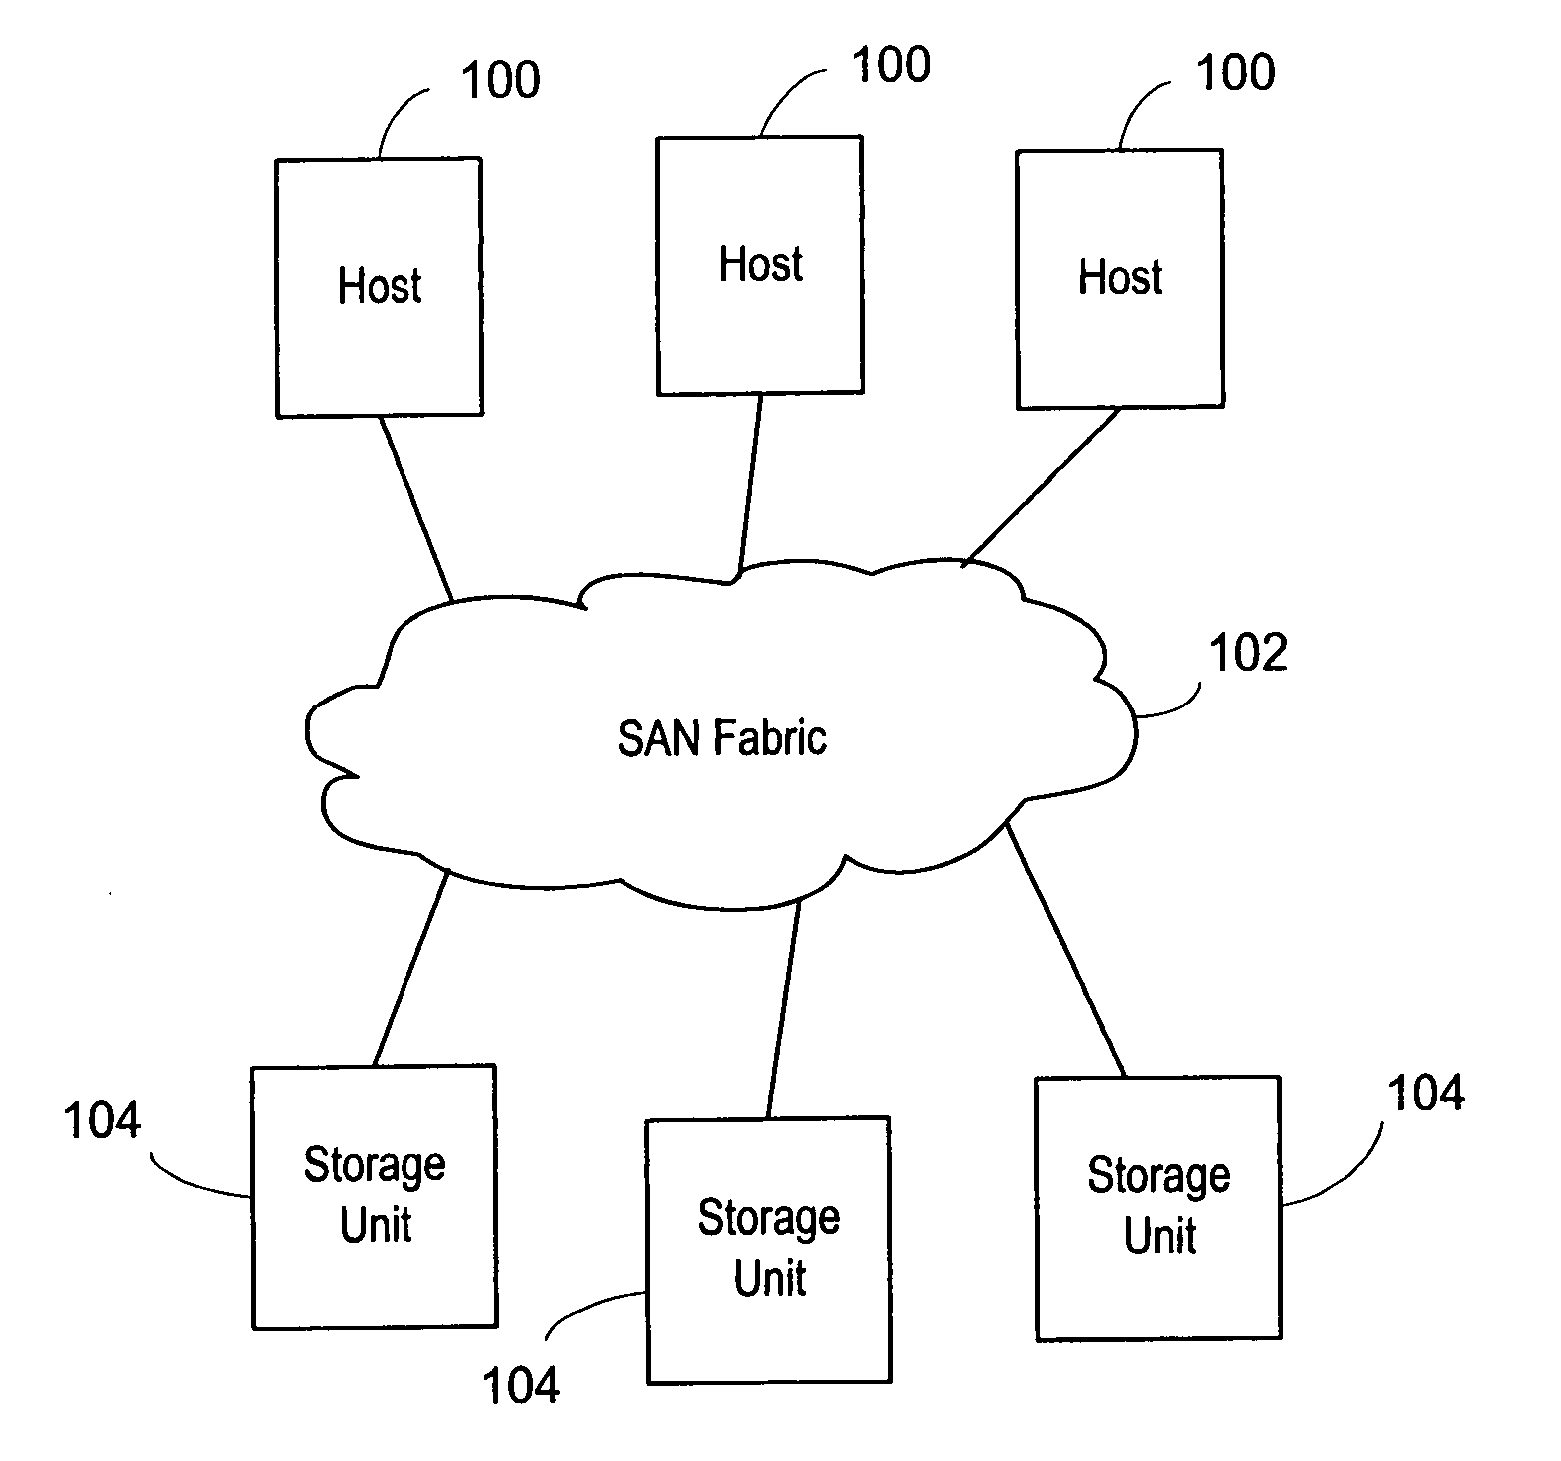 Automated deployment of operating system and data space to a server